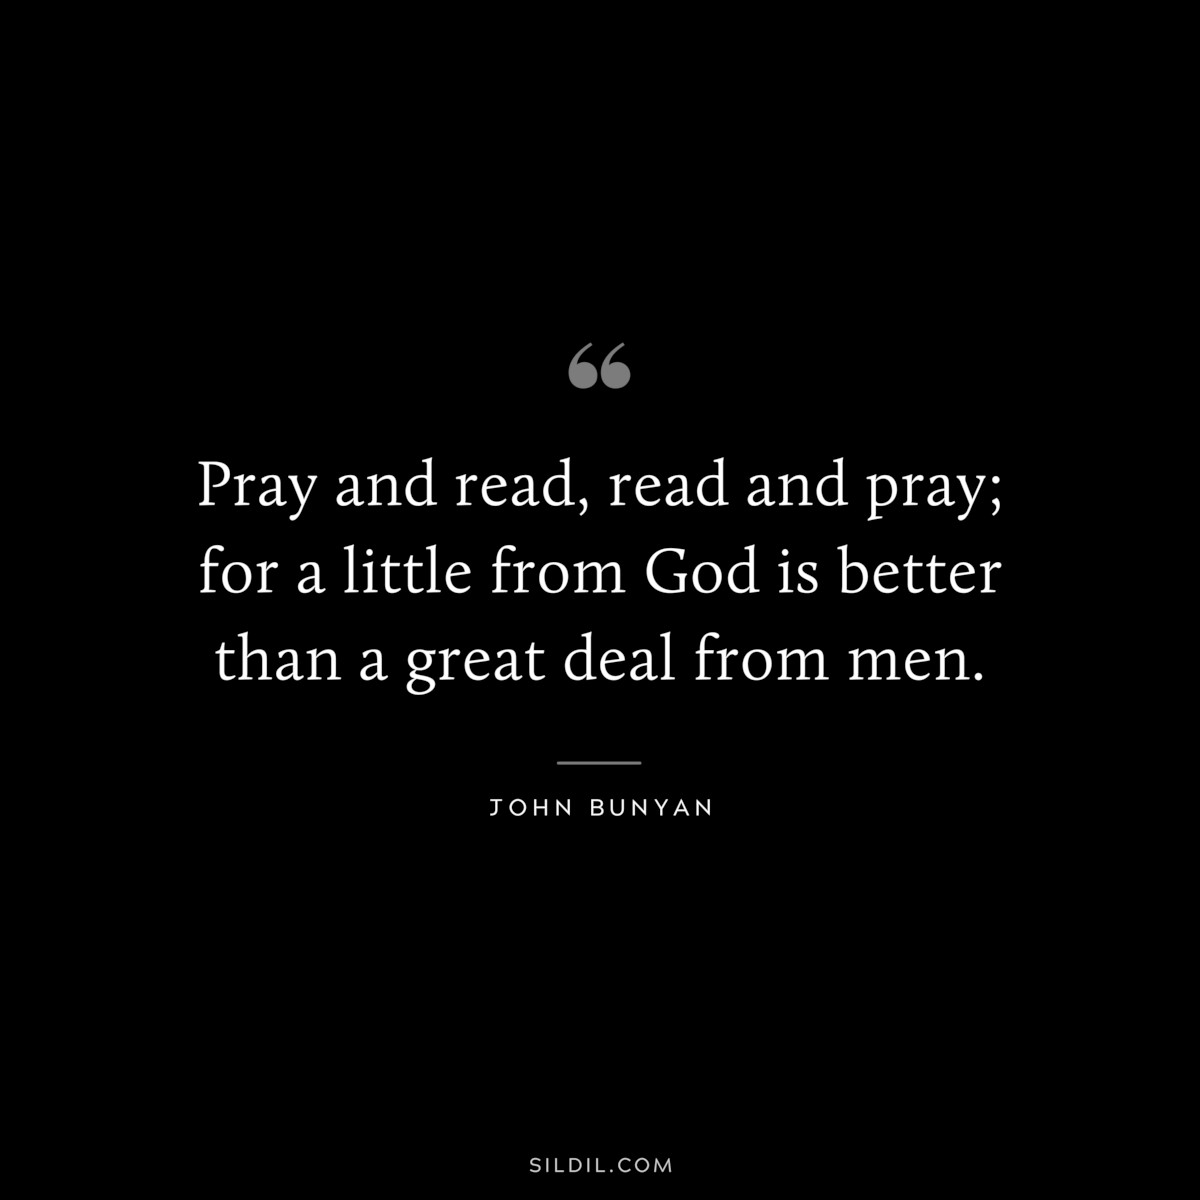 Pray and read, read and pray; for a little from God is better than a great deal from men. ― John Bunyan